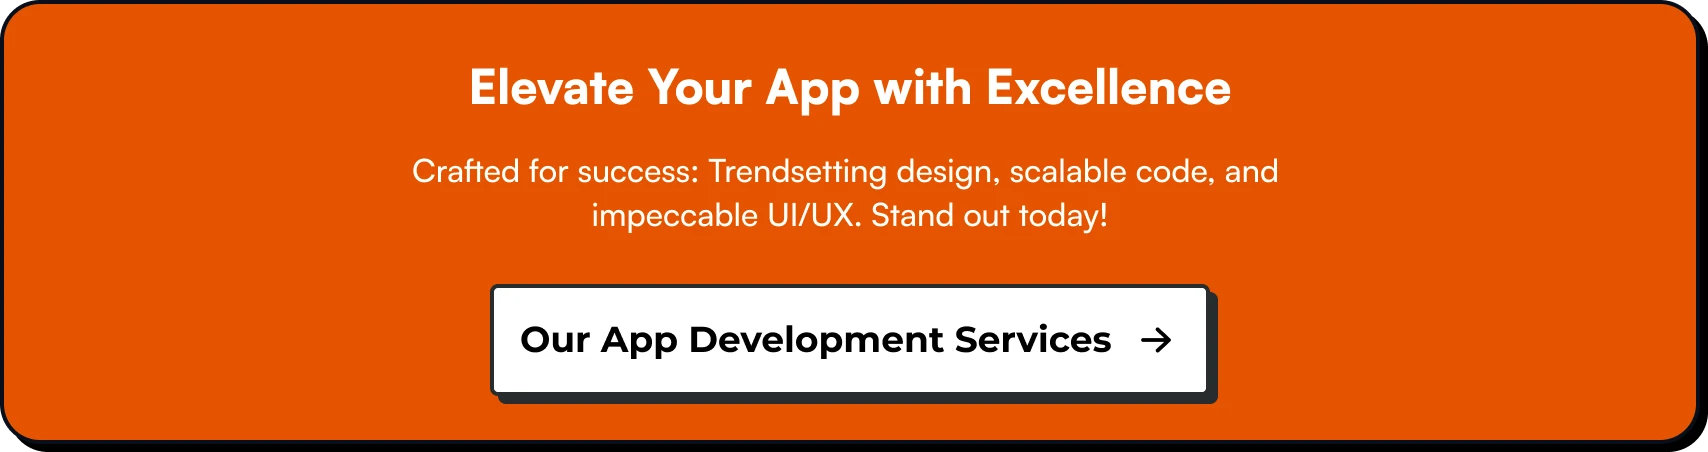 Elevate Your App with Excellence. Crafted for success: Trendsetting design, scalable code, and impeccable UI/UX. Stand out today!